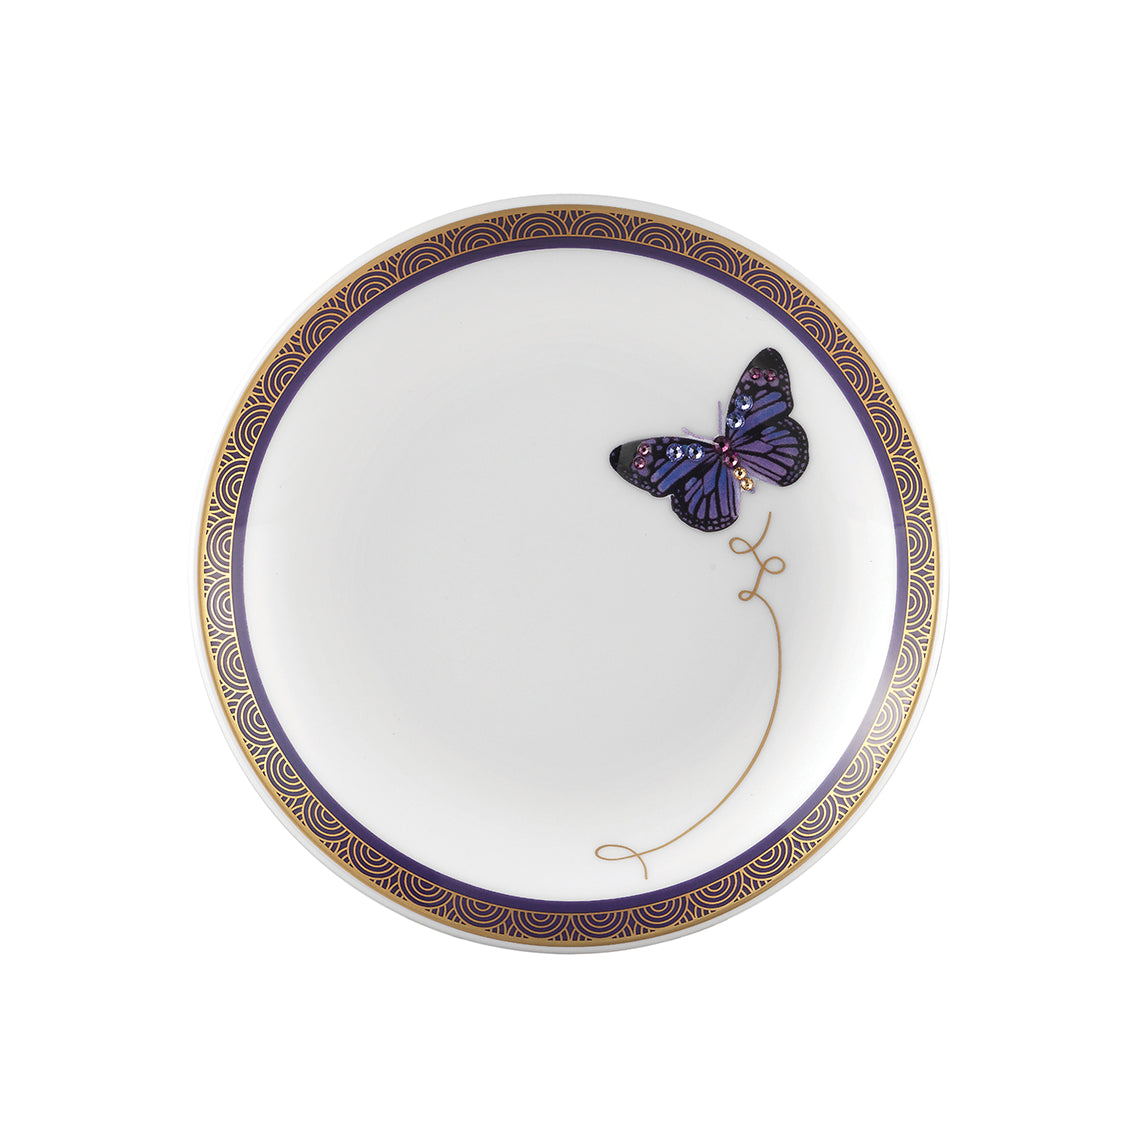 My Butterfly - Small Jewelry Tray, Set of 4